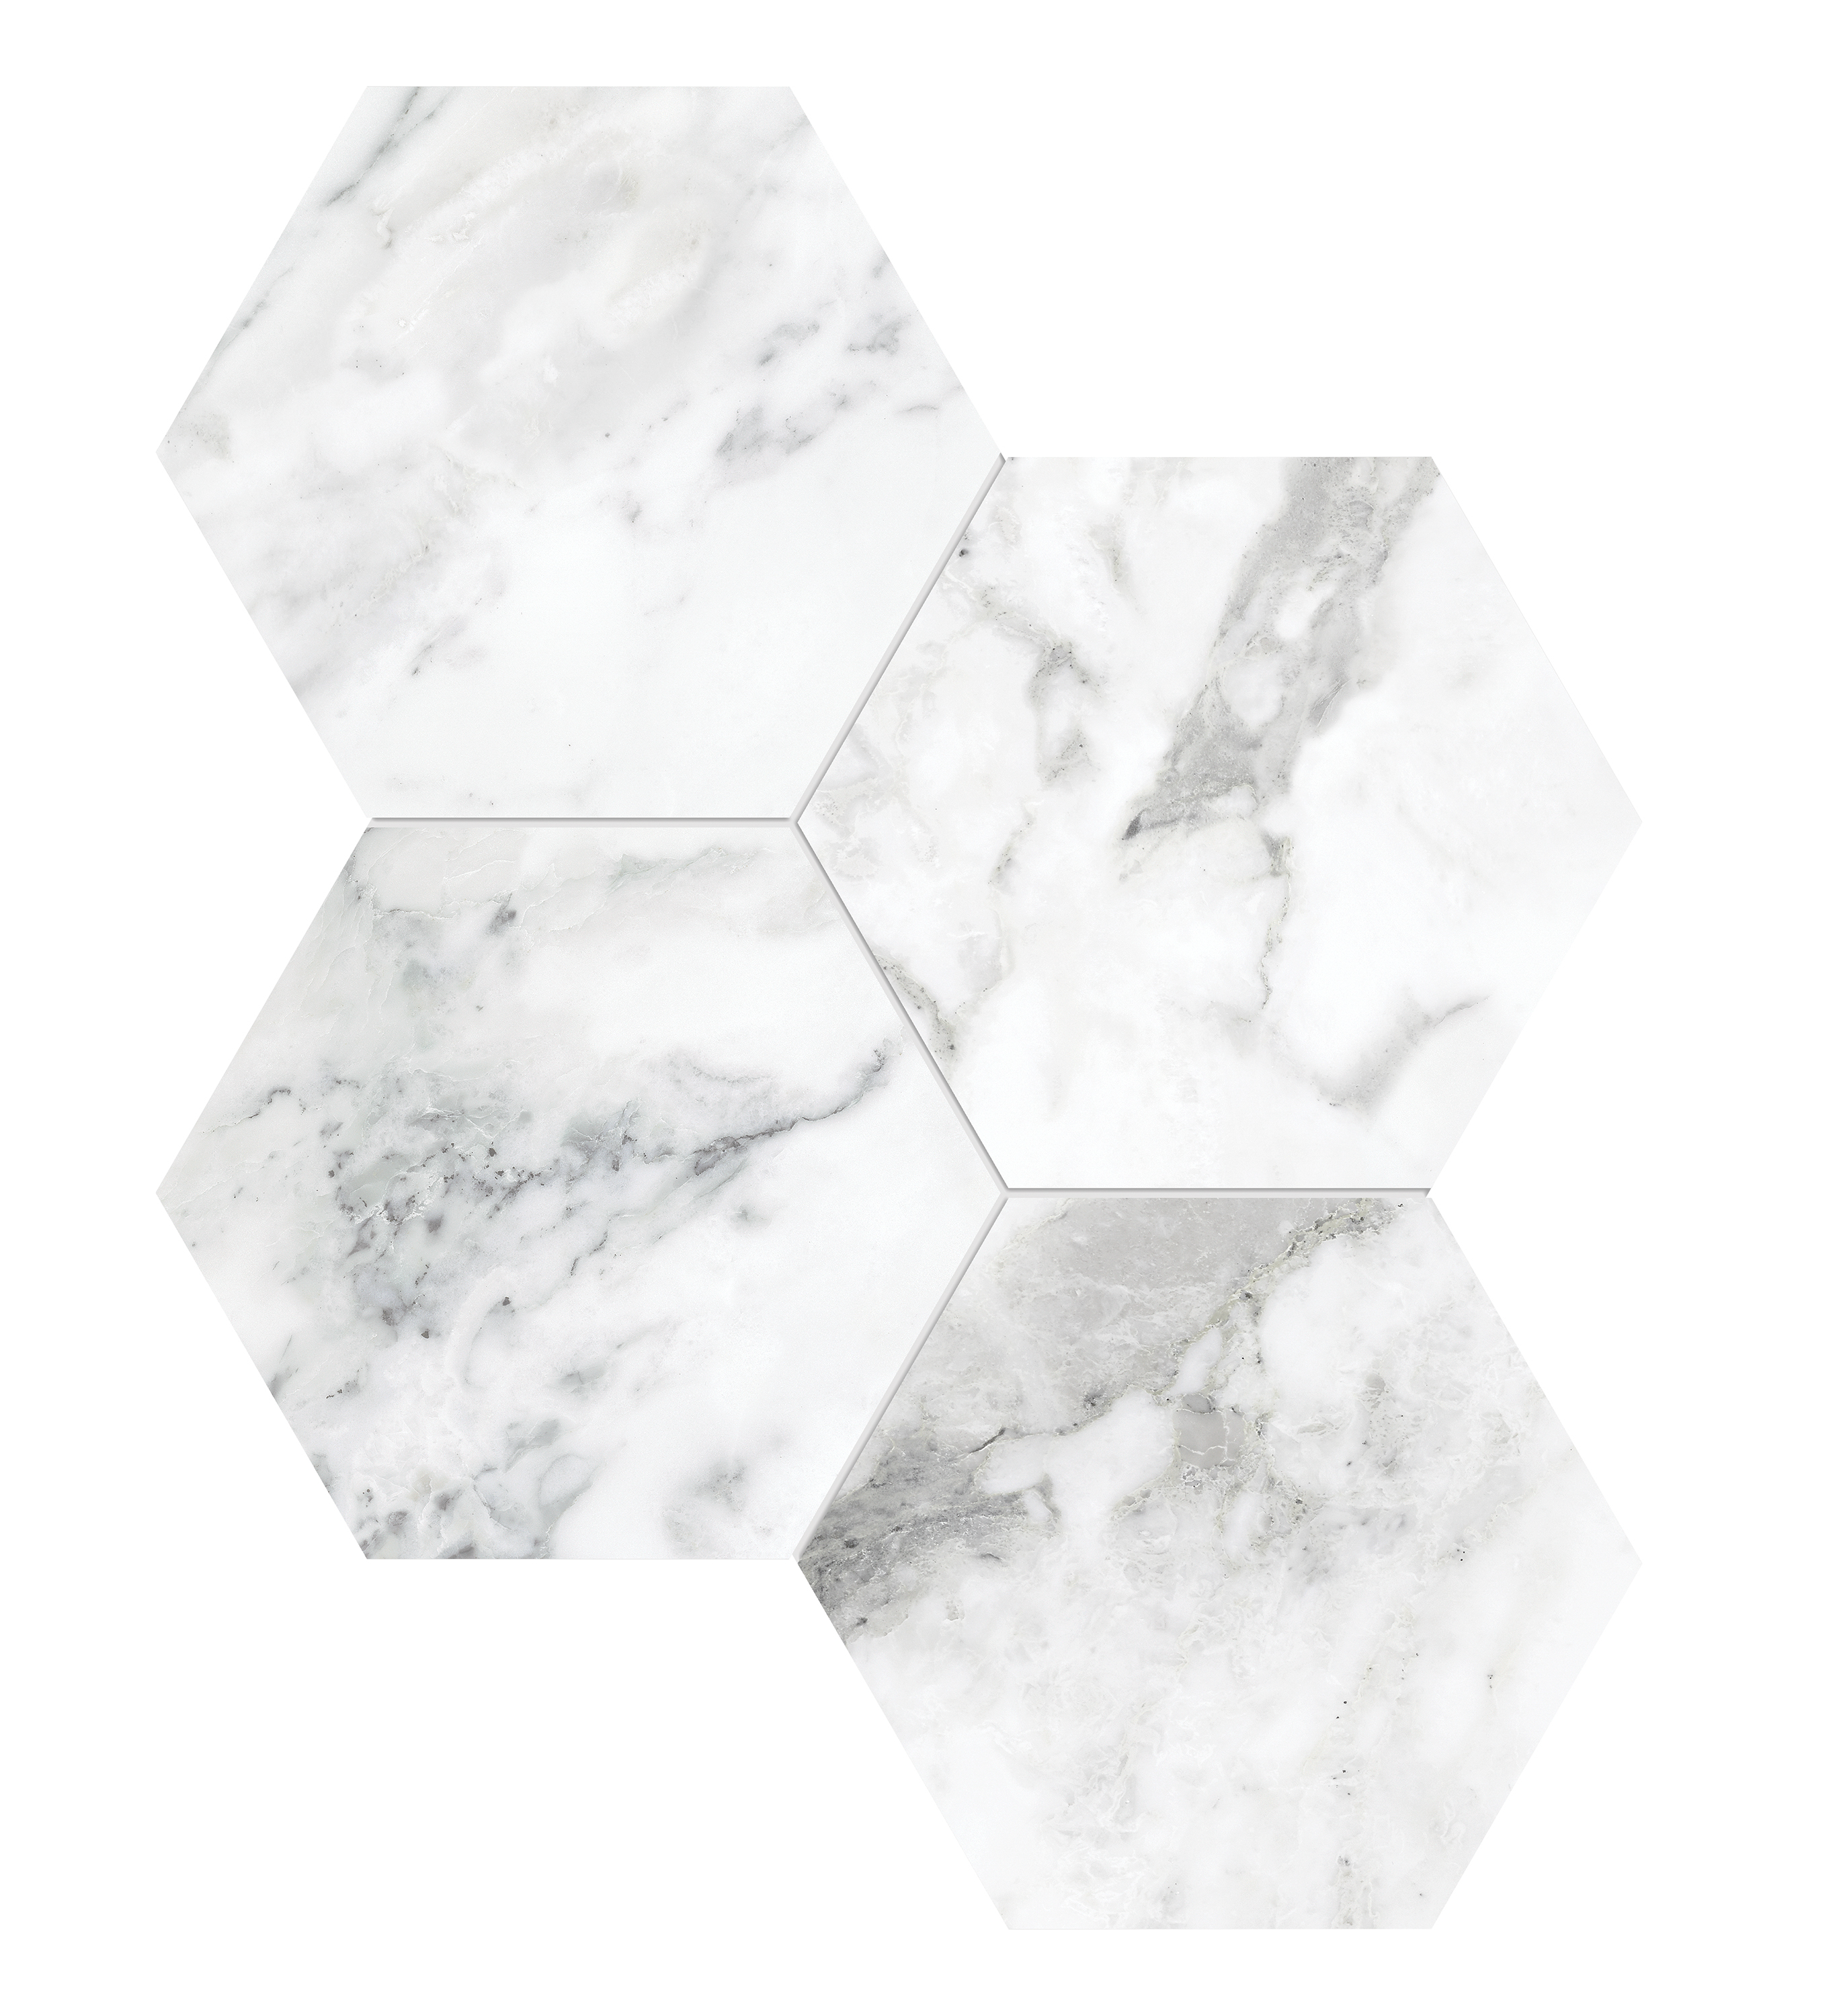 arabescato hexagon 6-inch pattern glazed porcelain mosaic from la marca anatolia collection distributed by surface group international honed finish straight edge edge mesh shape